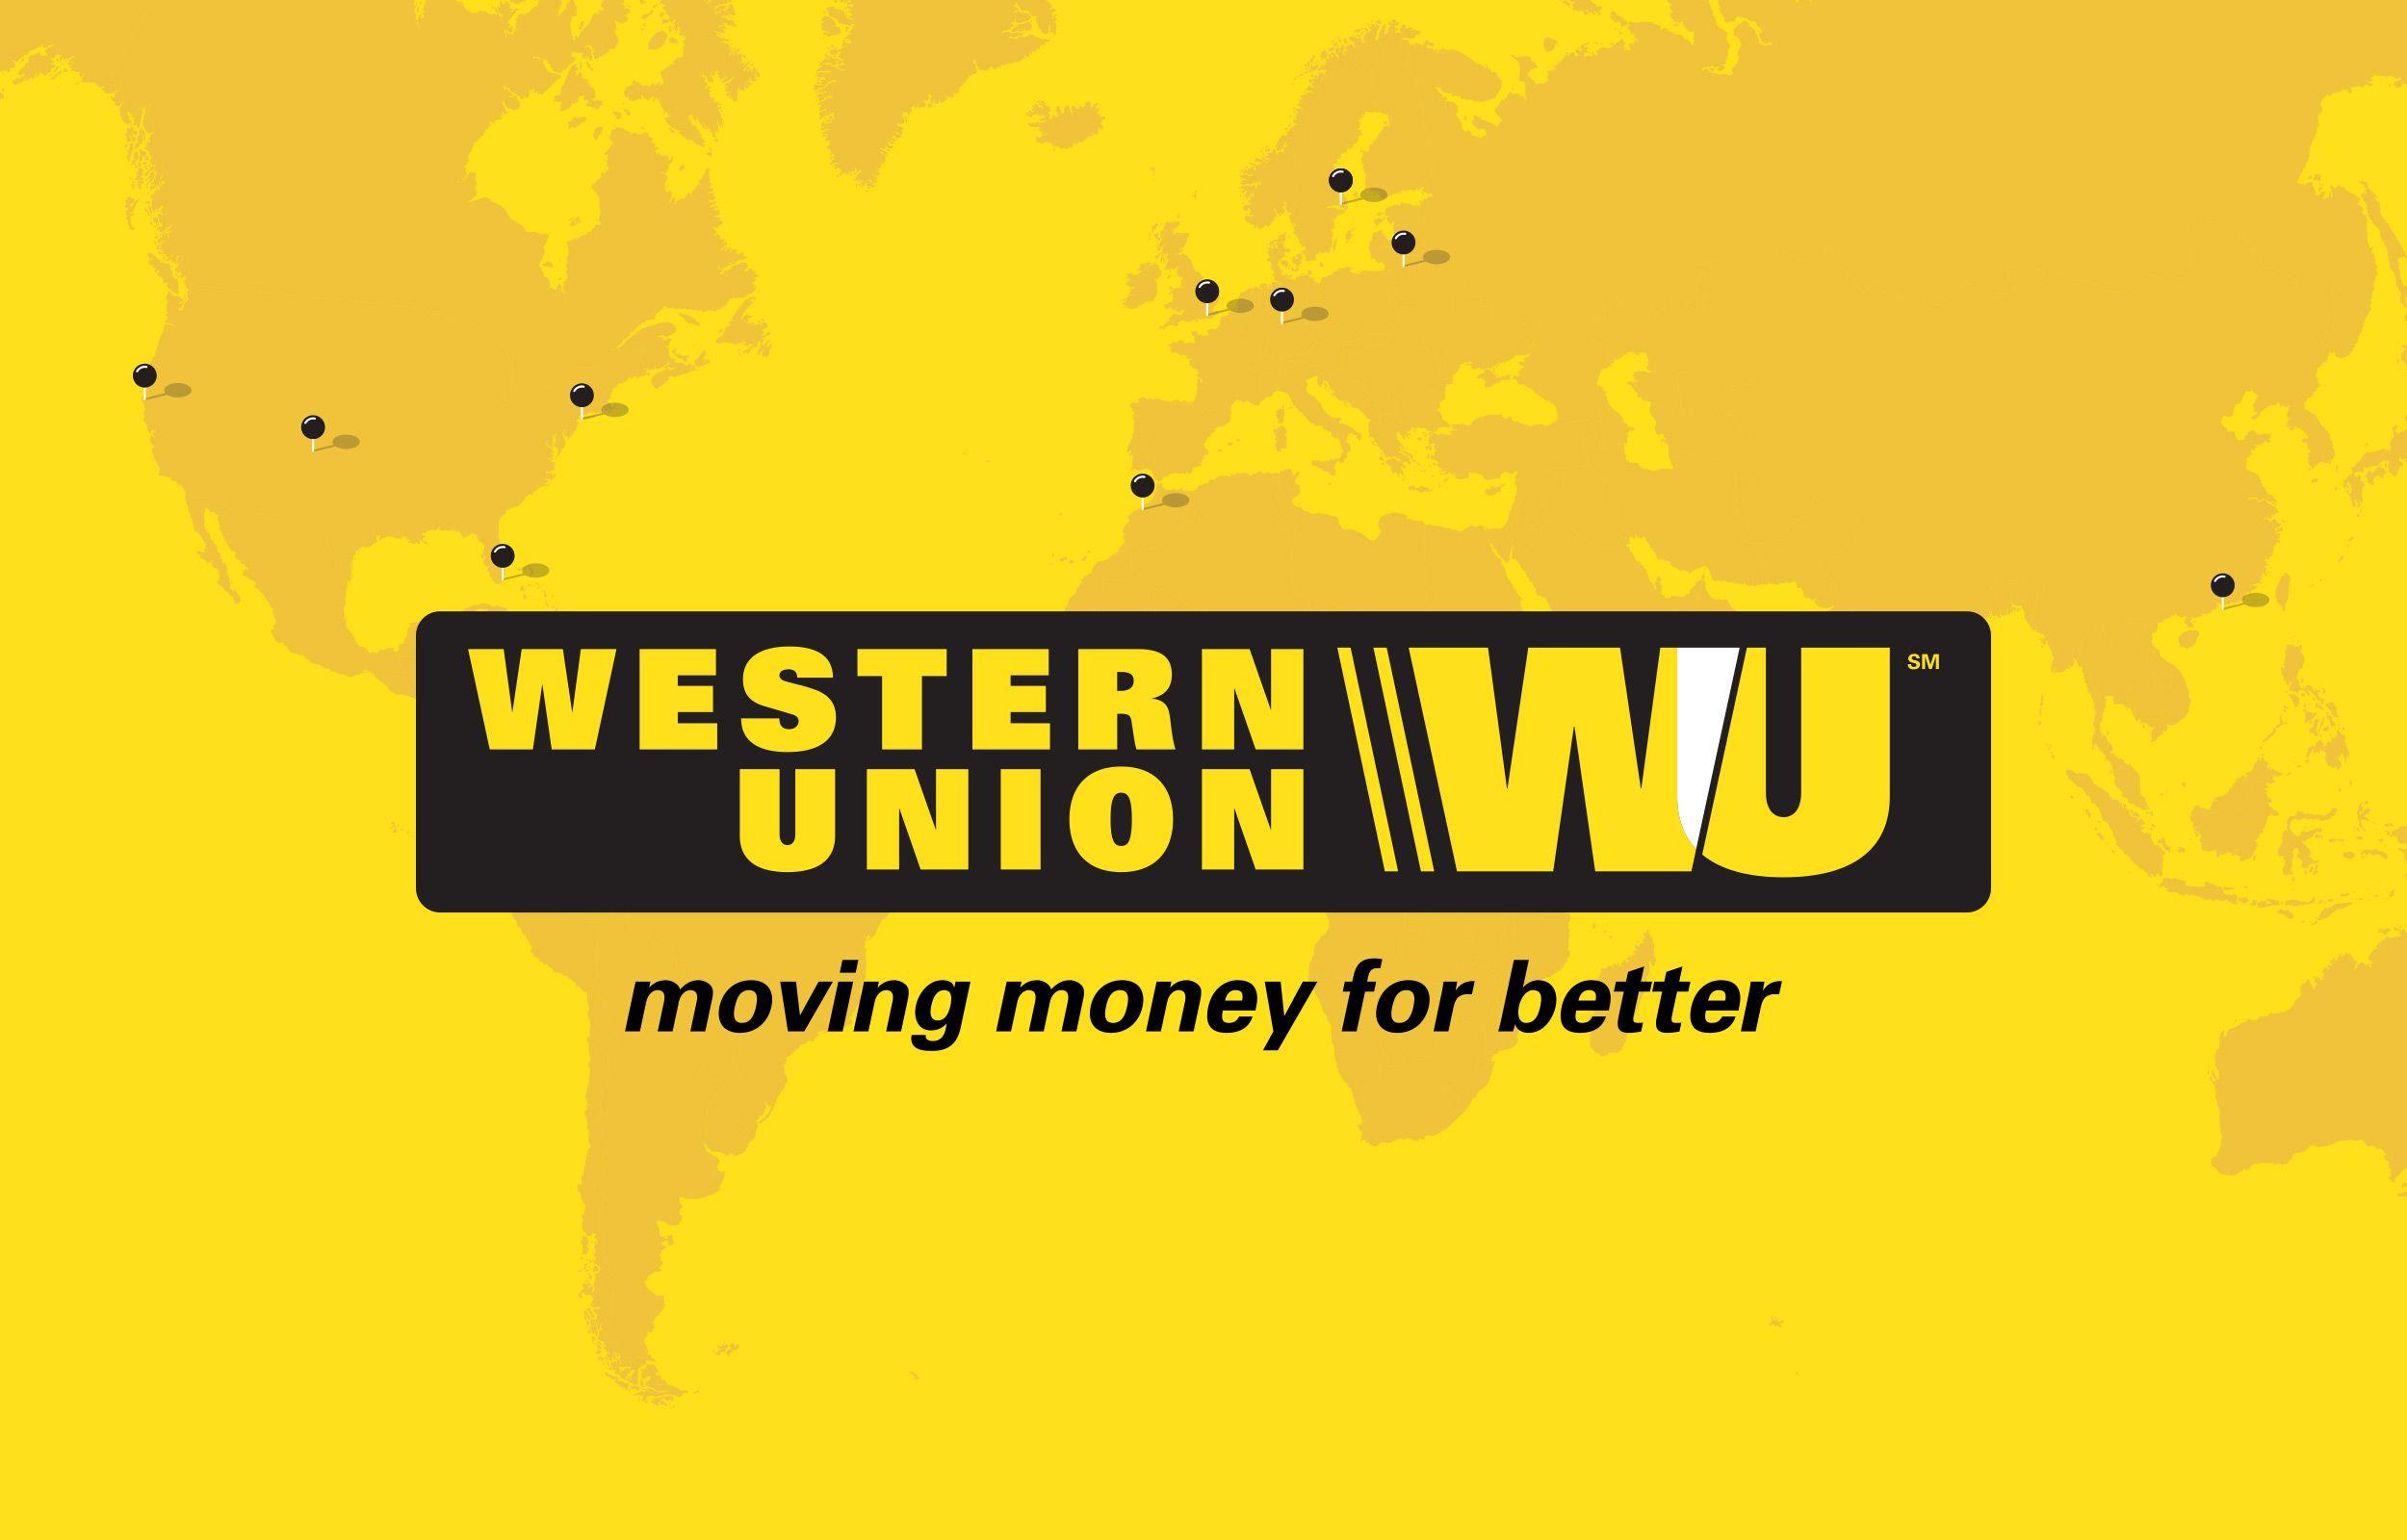 Western Union New Logo - Brand New Cars Up For Grabs In Western Union Mega Promo SECOND